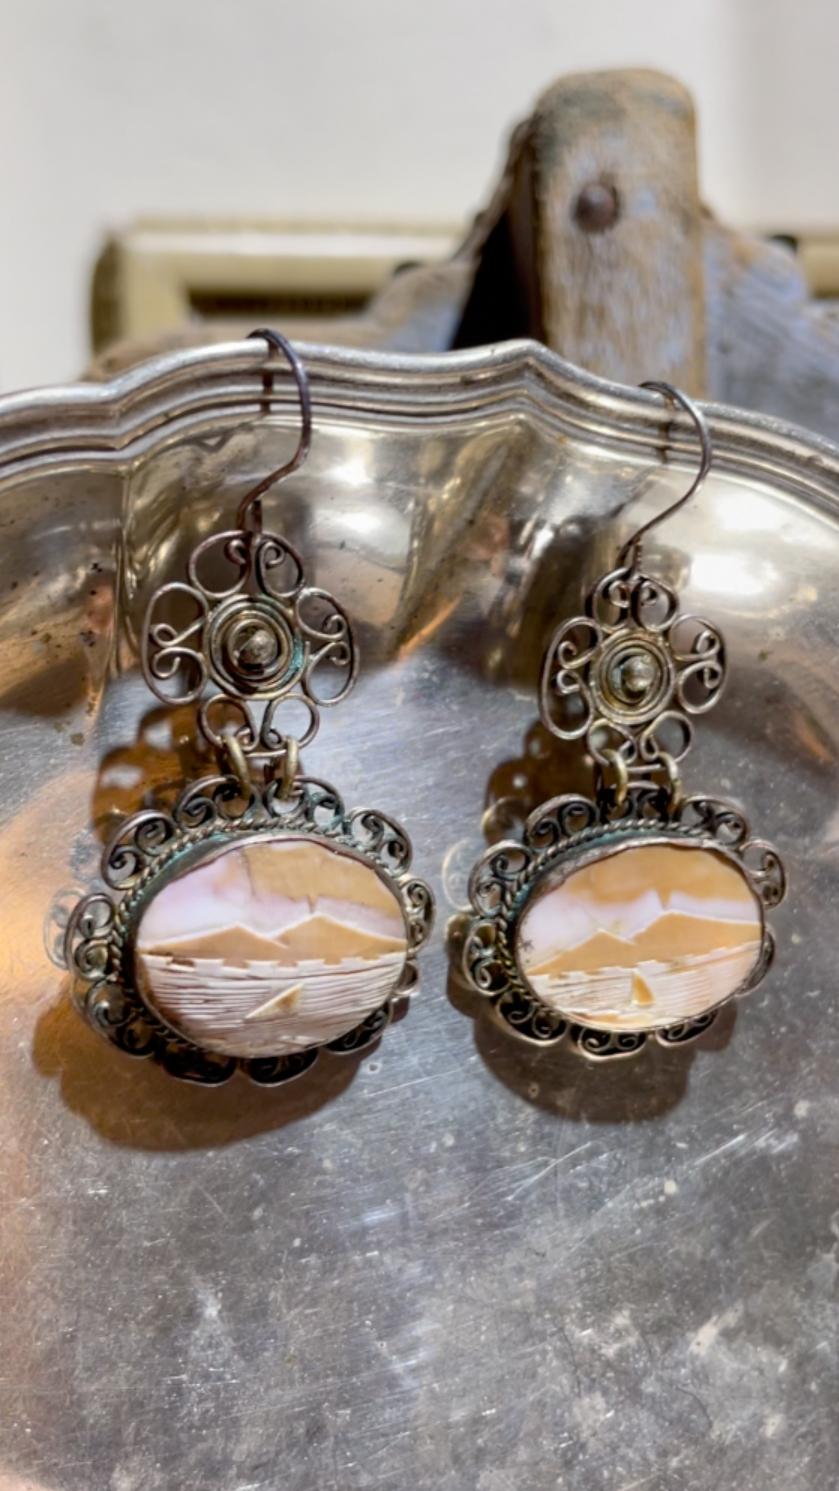 Vintage shell cameo earrings - Naturalistic Art by Unknown